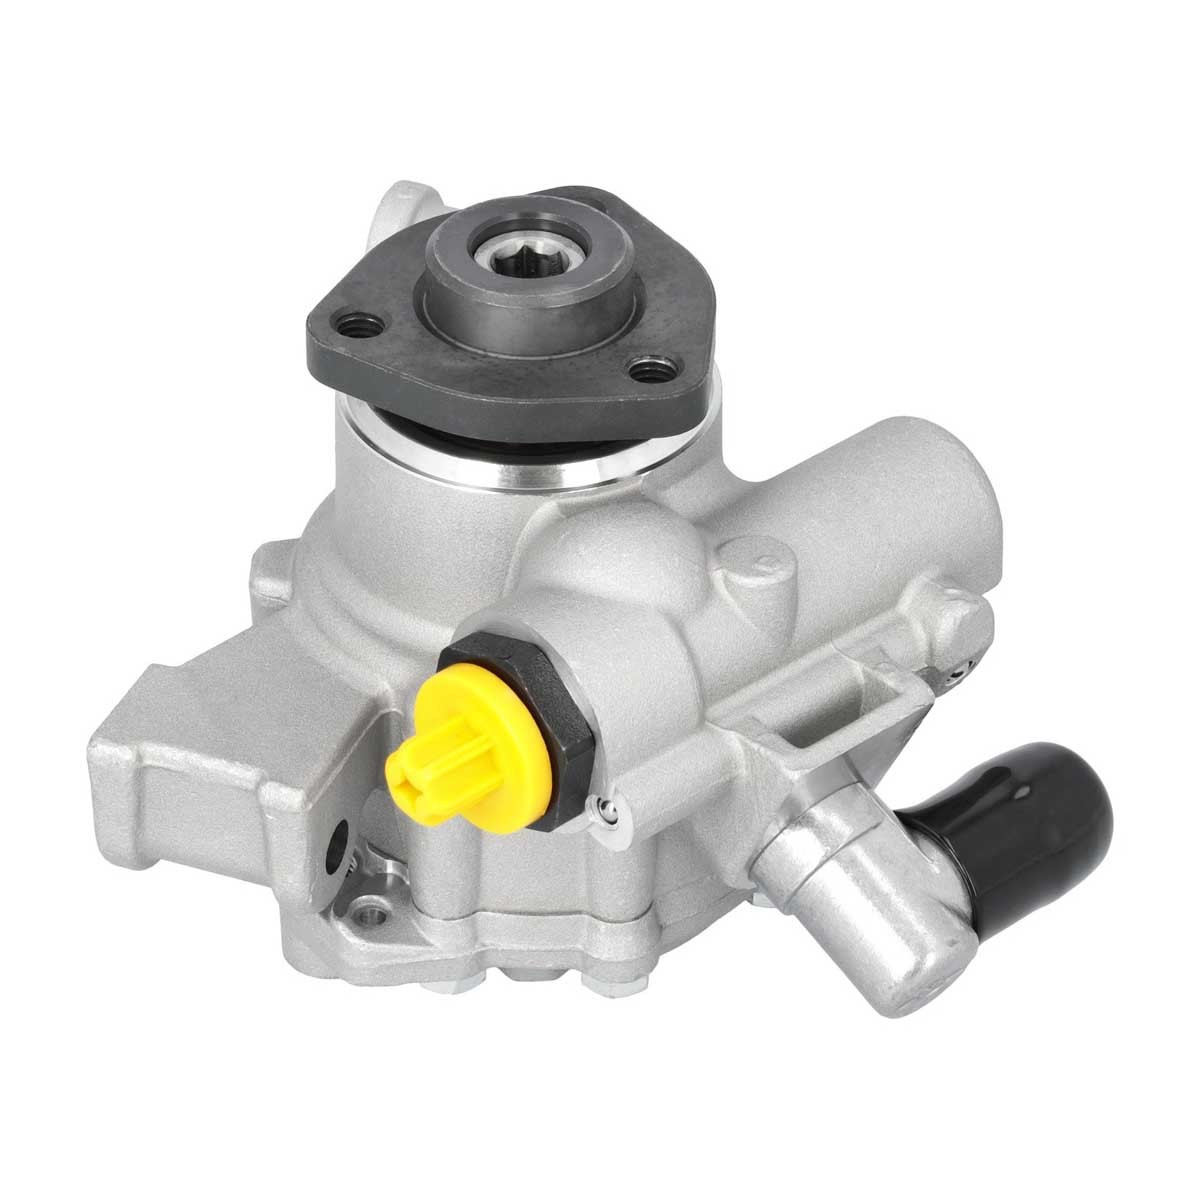 MEYLE 014 631 0007 Power steering pump MERCEDES-BENZ experience and price